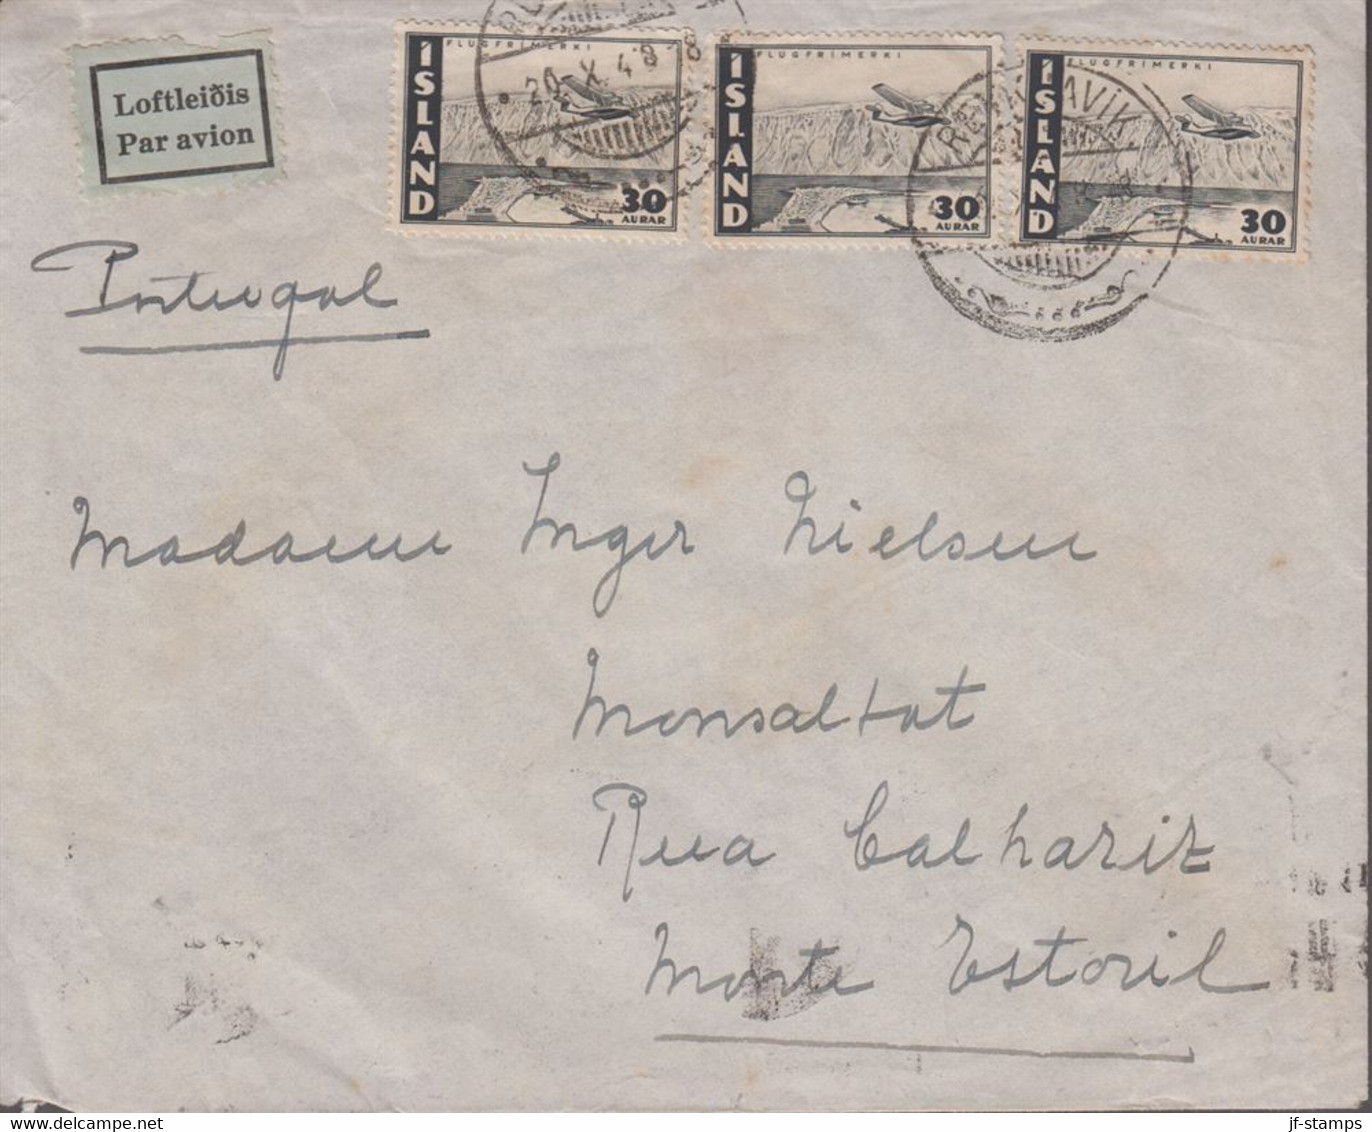 1948. ISLAND. . Air Mail. 3 Ex 30 Aur Pair On Cover From REYKJAVIK 20 X 1948 To Portu... (Michel 242) - JF419126 - Covers & Documents